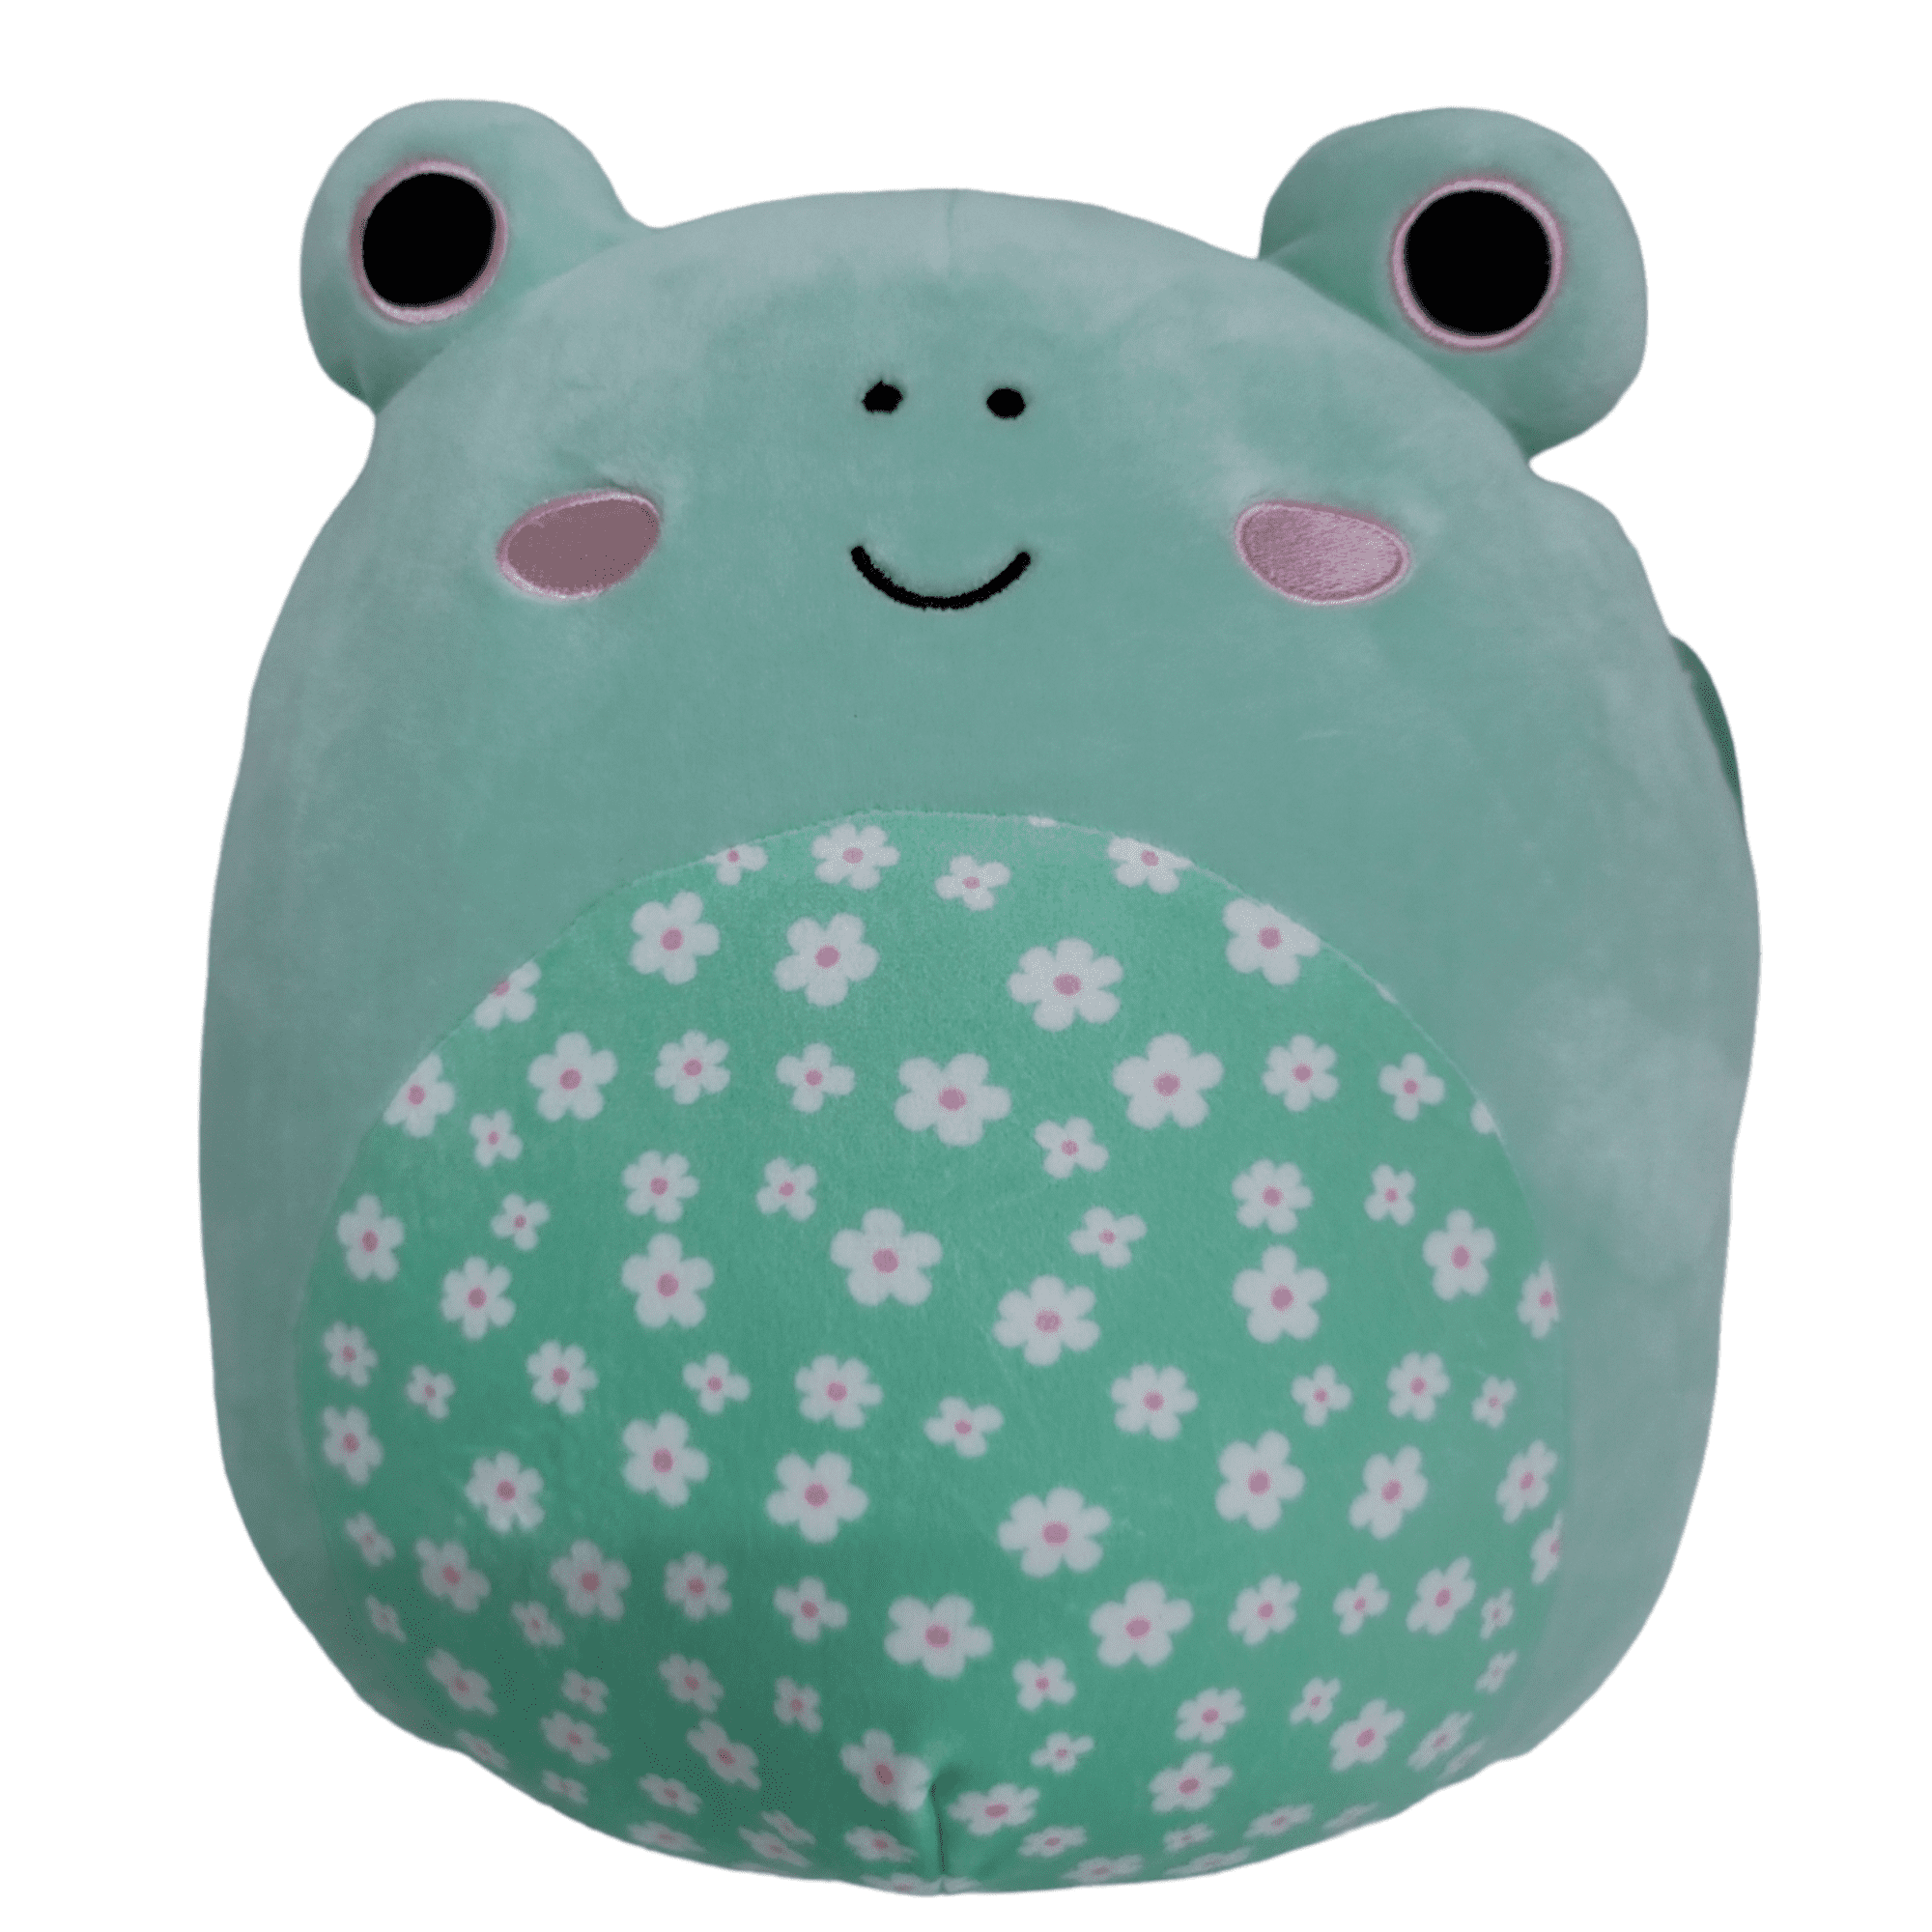 Squishmallows Official Kellytoys Plush 11 Inch Fritz the Light Green Frog  Floral Belly Easter Edition Wendy Ultimate Soft Plush Stuffed Toy